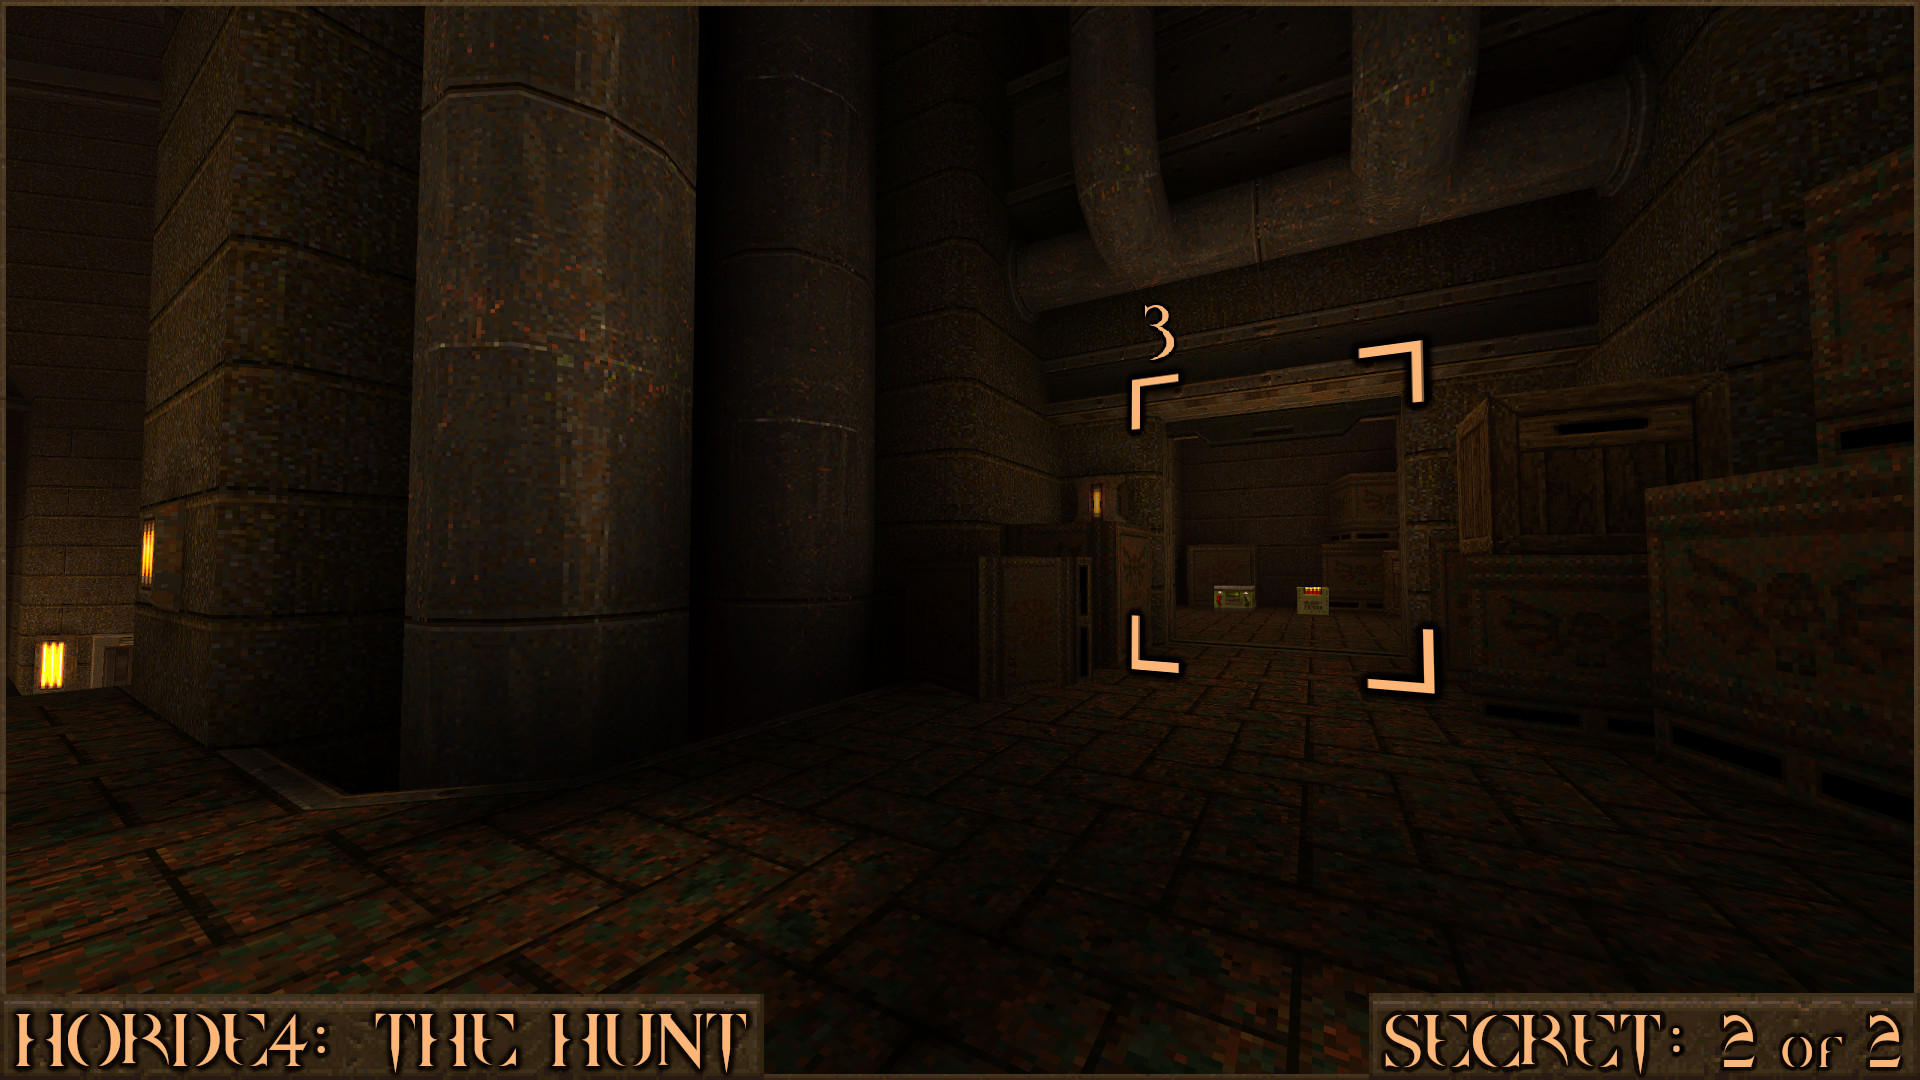 Quake - Finding all the Secrets - HORDE4: The Hunt - DF68130